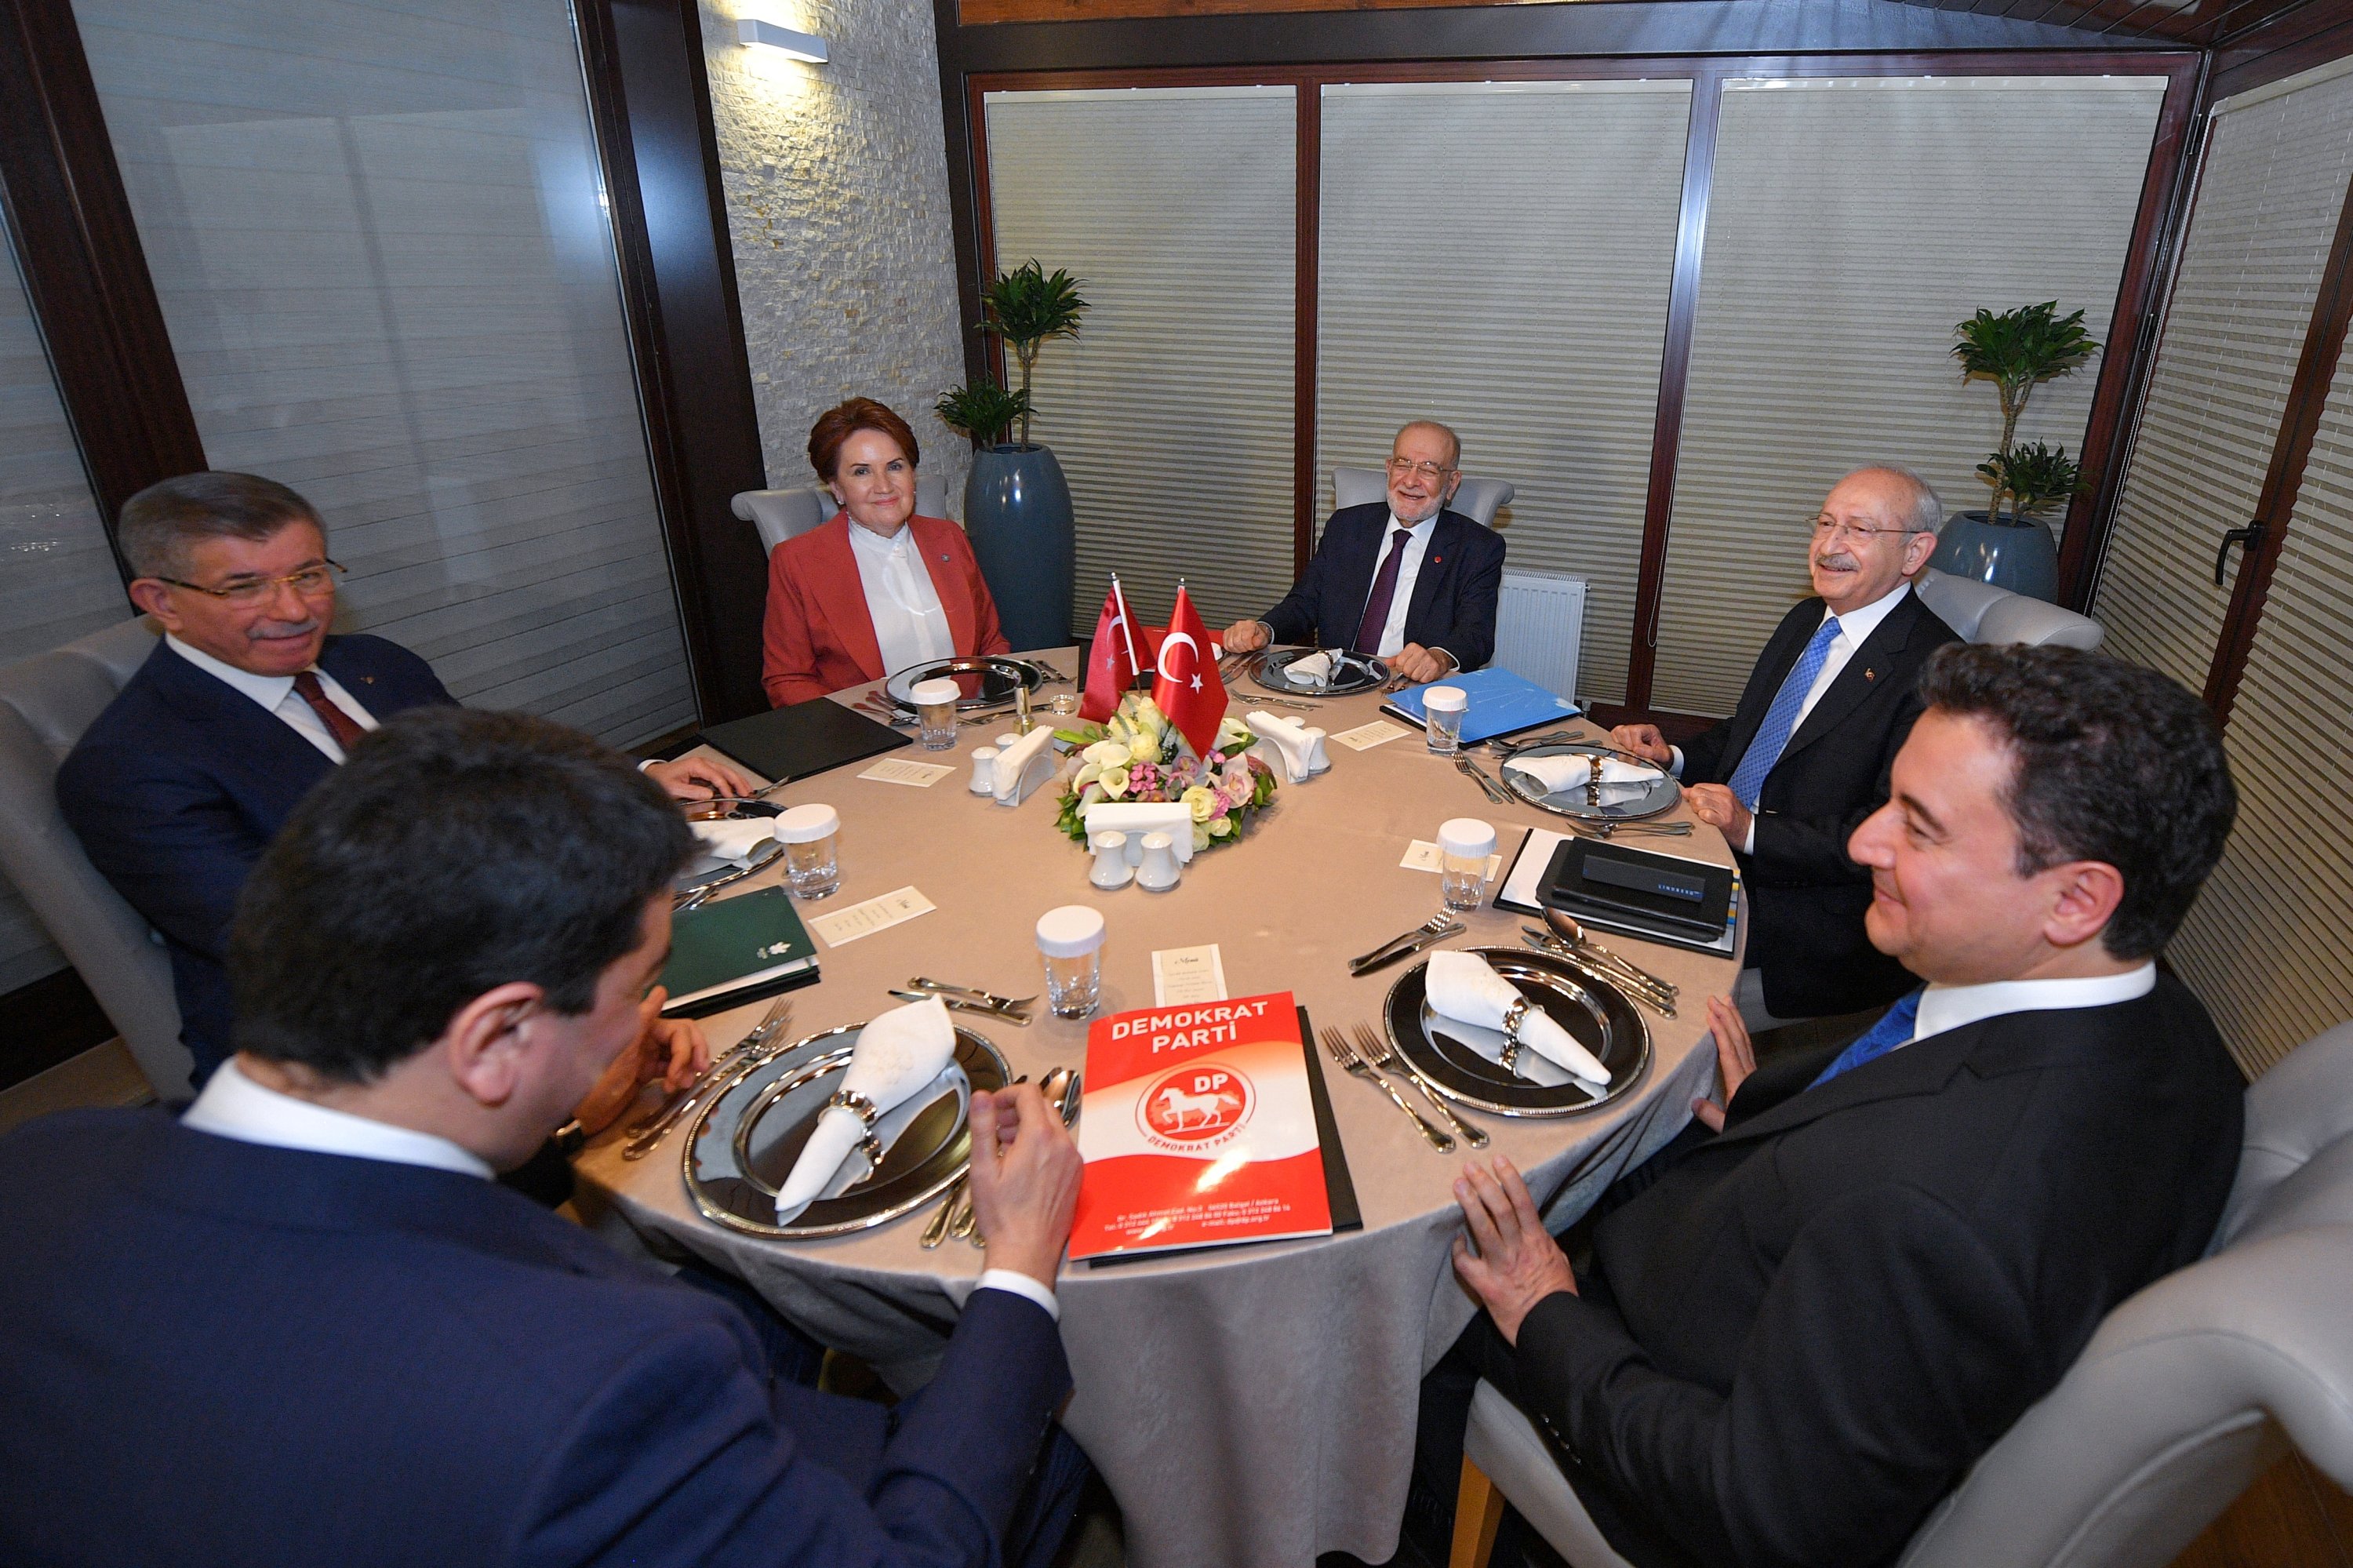 Representatives from Turkey's six opposition parties (L-R): Democrat Party (DP) Chairperson Gültekin Uysal, Future Party (GP) Chairperson Ahmet Davutoğlu and Good Party (IP) Chairperson Meral Akşener, Felicity Party (SP) Chairperson Temel Karamollaoğlu, the Republican People's Party (CHP) Chairperson Kemal Kılıçdaroğlu and Democracy and Progress Party (DEVA) Chairperson Ali Babacan pose ahead of a meeting at the Çankaya Municipality facilities, in capital Ankara, Turkey, Feb. 12, 2022. (Reuters Photo)